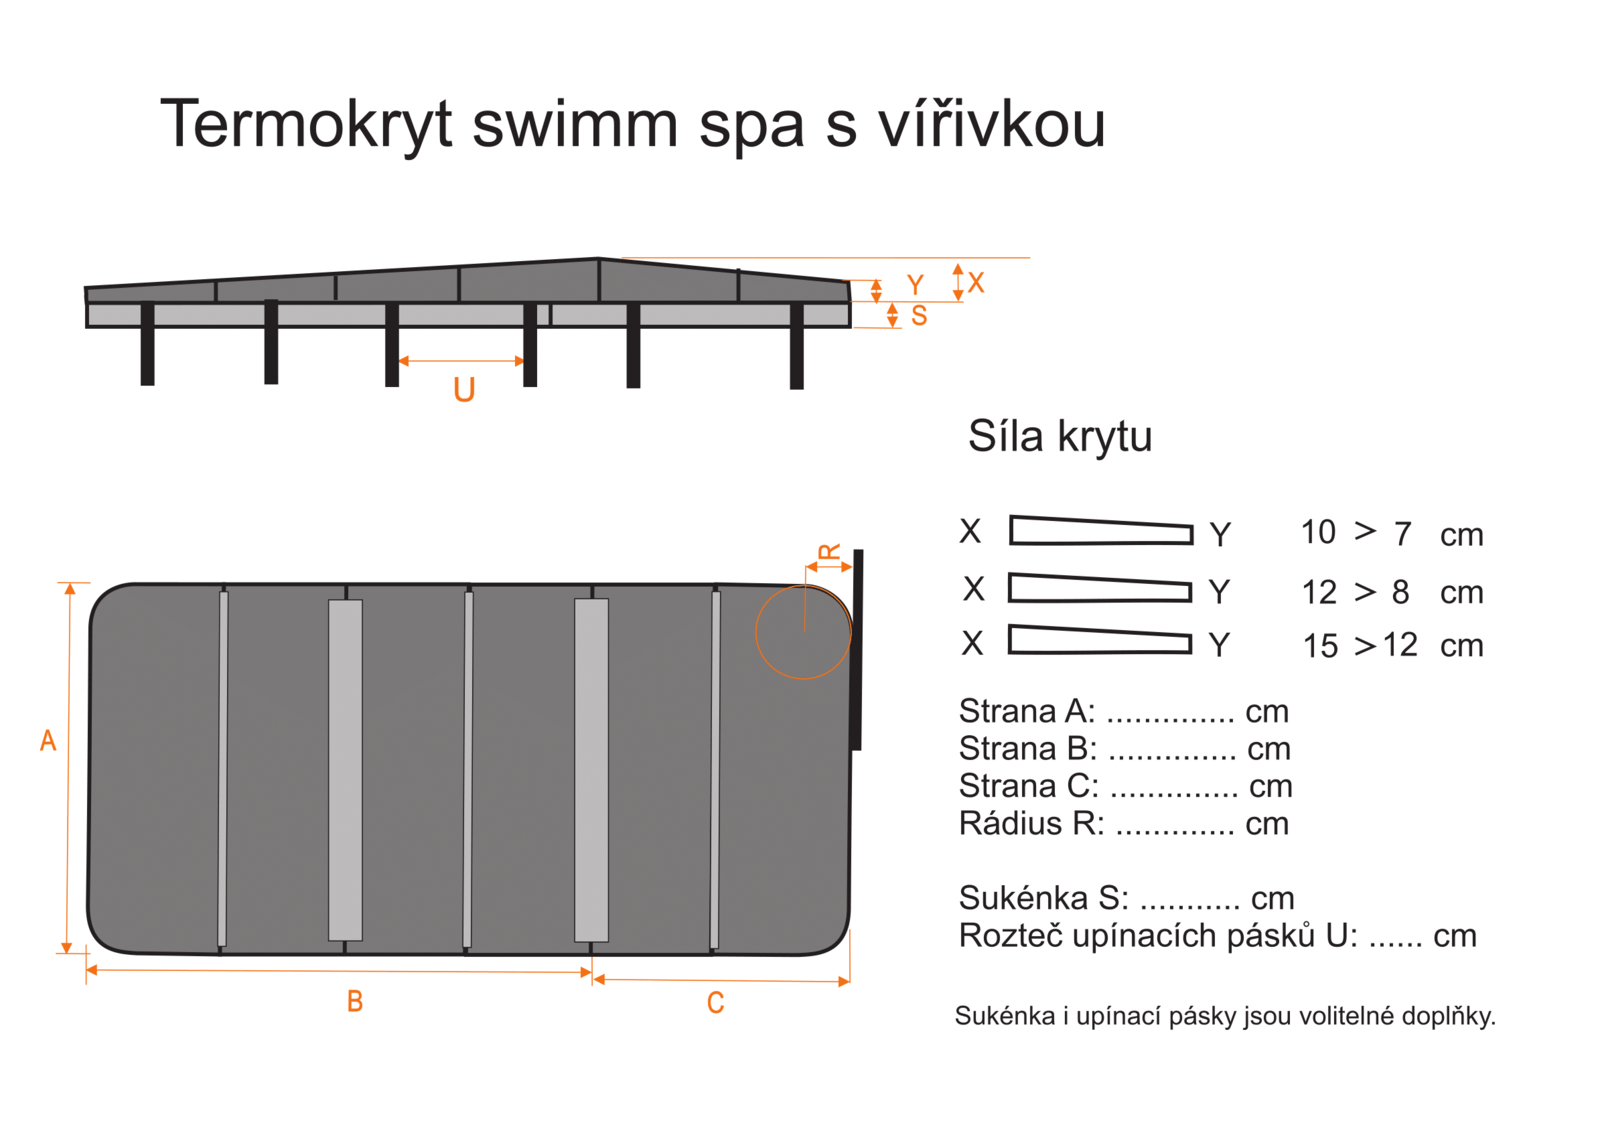 Thermal cover swimm spa with whirlpool